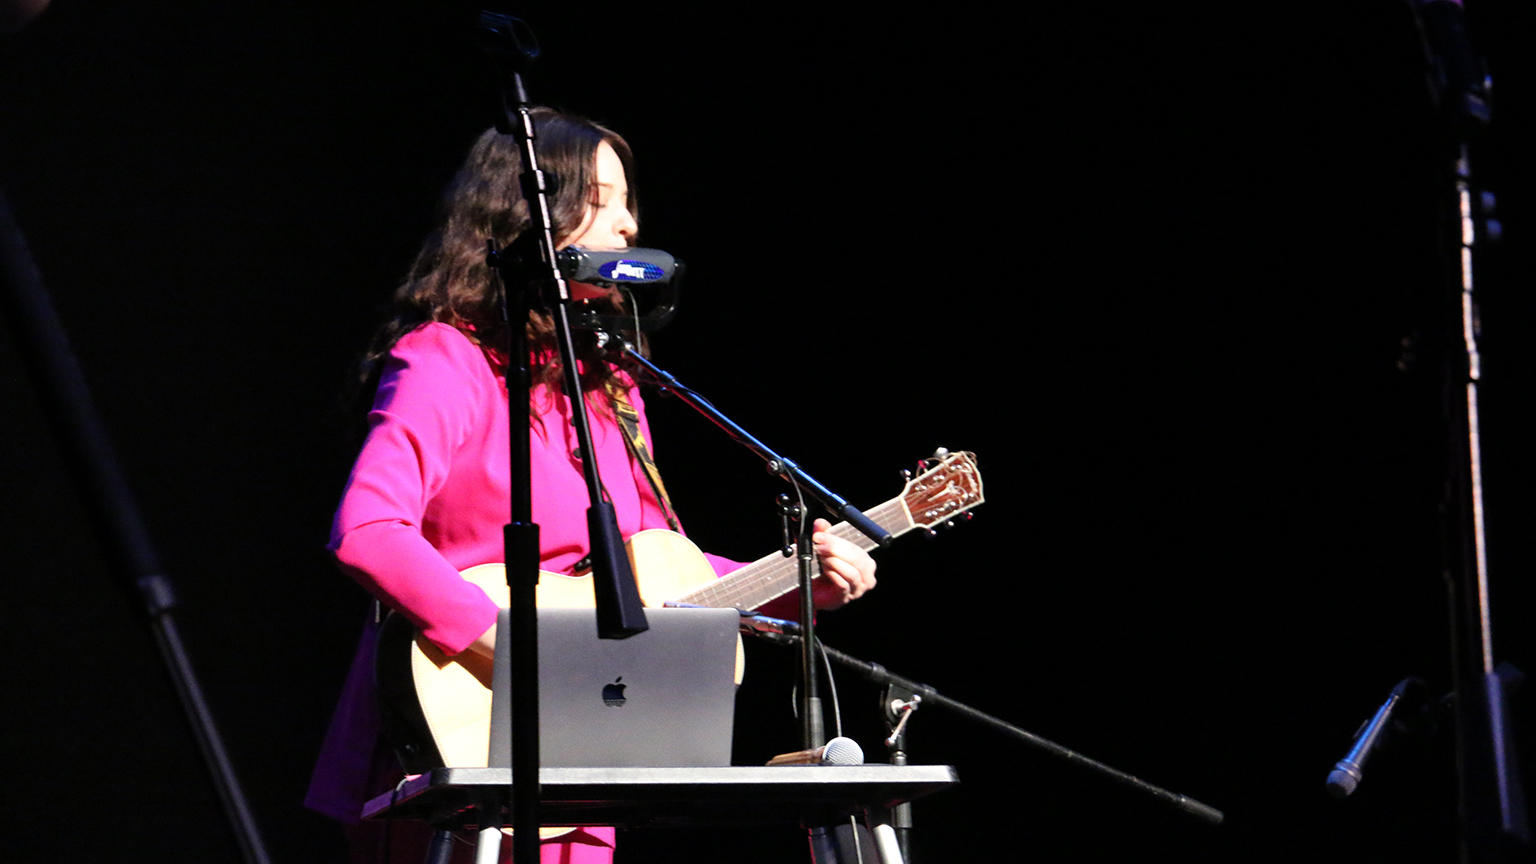 Virtuoso Chelsea Shag performs with her guitar and the Jammbox Pro, an instrument that is used like a harmonica.